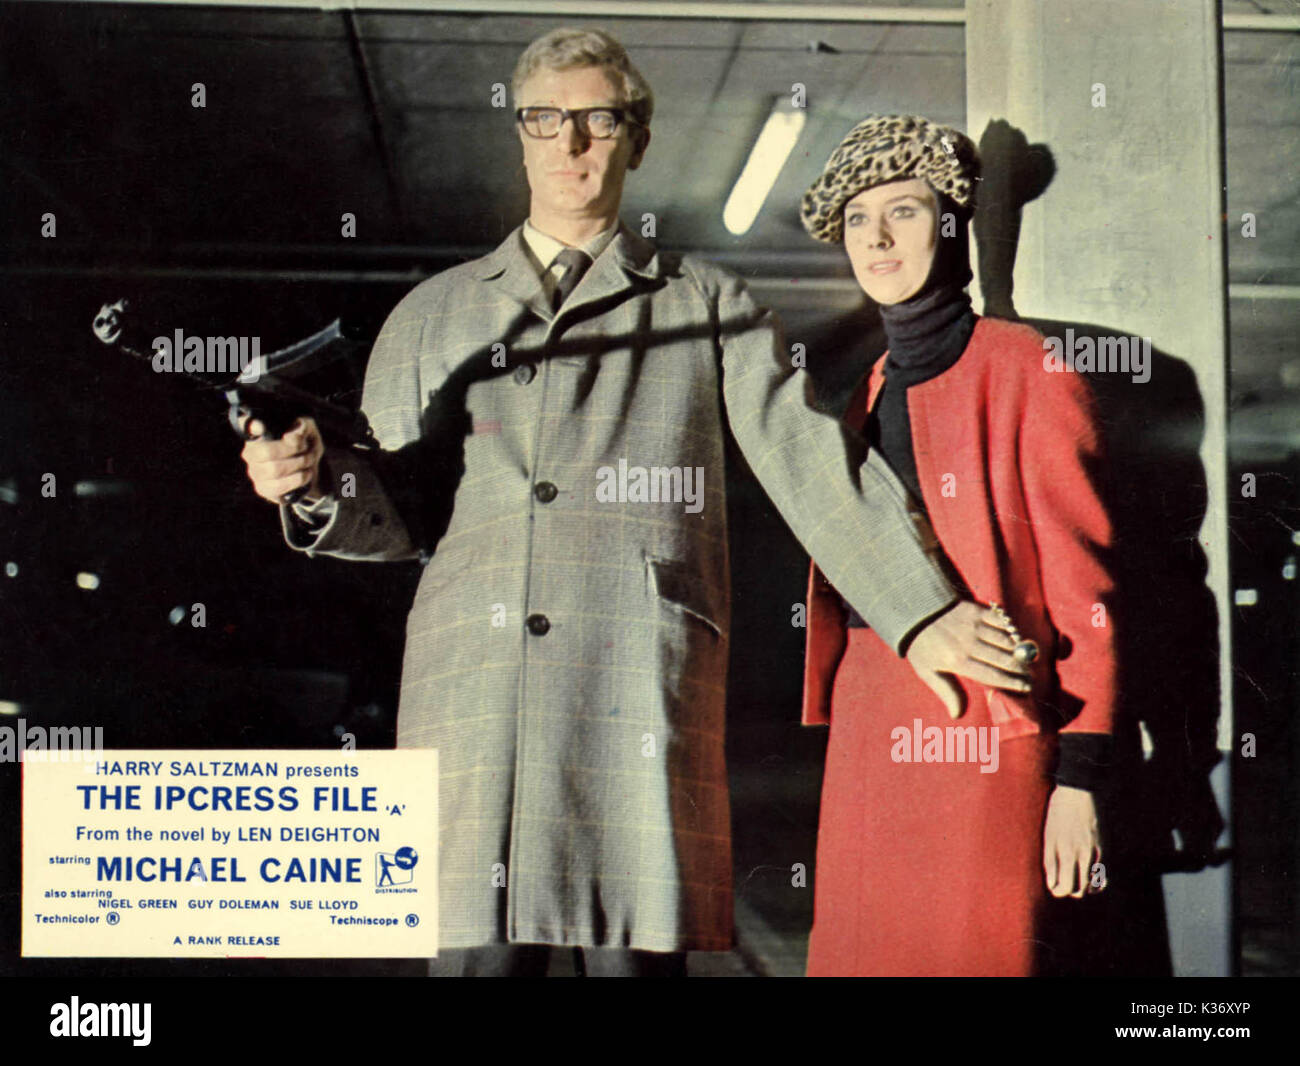 THE IPCRESS FILE MICHAEL CAINE AS HARRY PALMER, SUE LLOYD AS JEAN COURTNEY     Date: 1965 Stock Photo